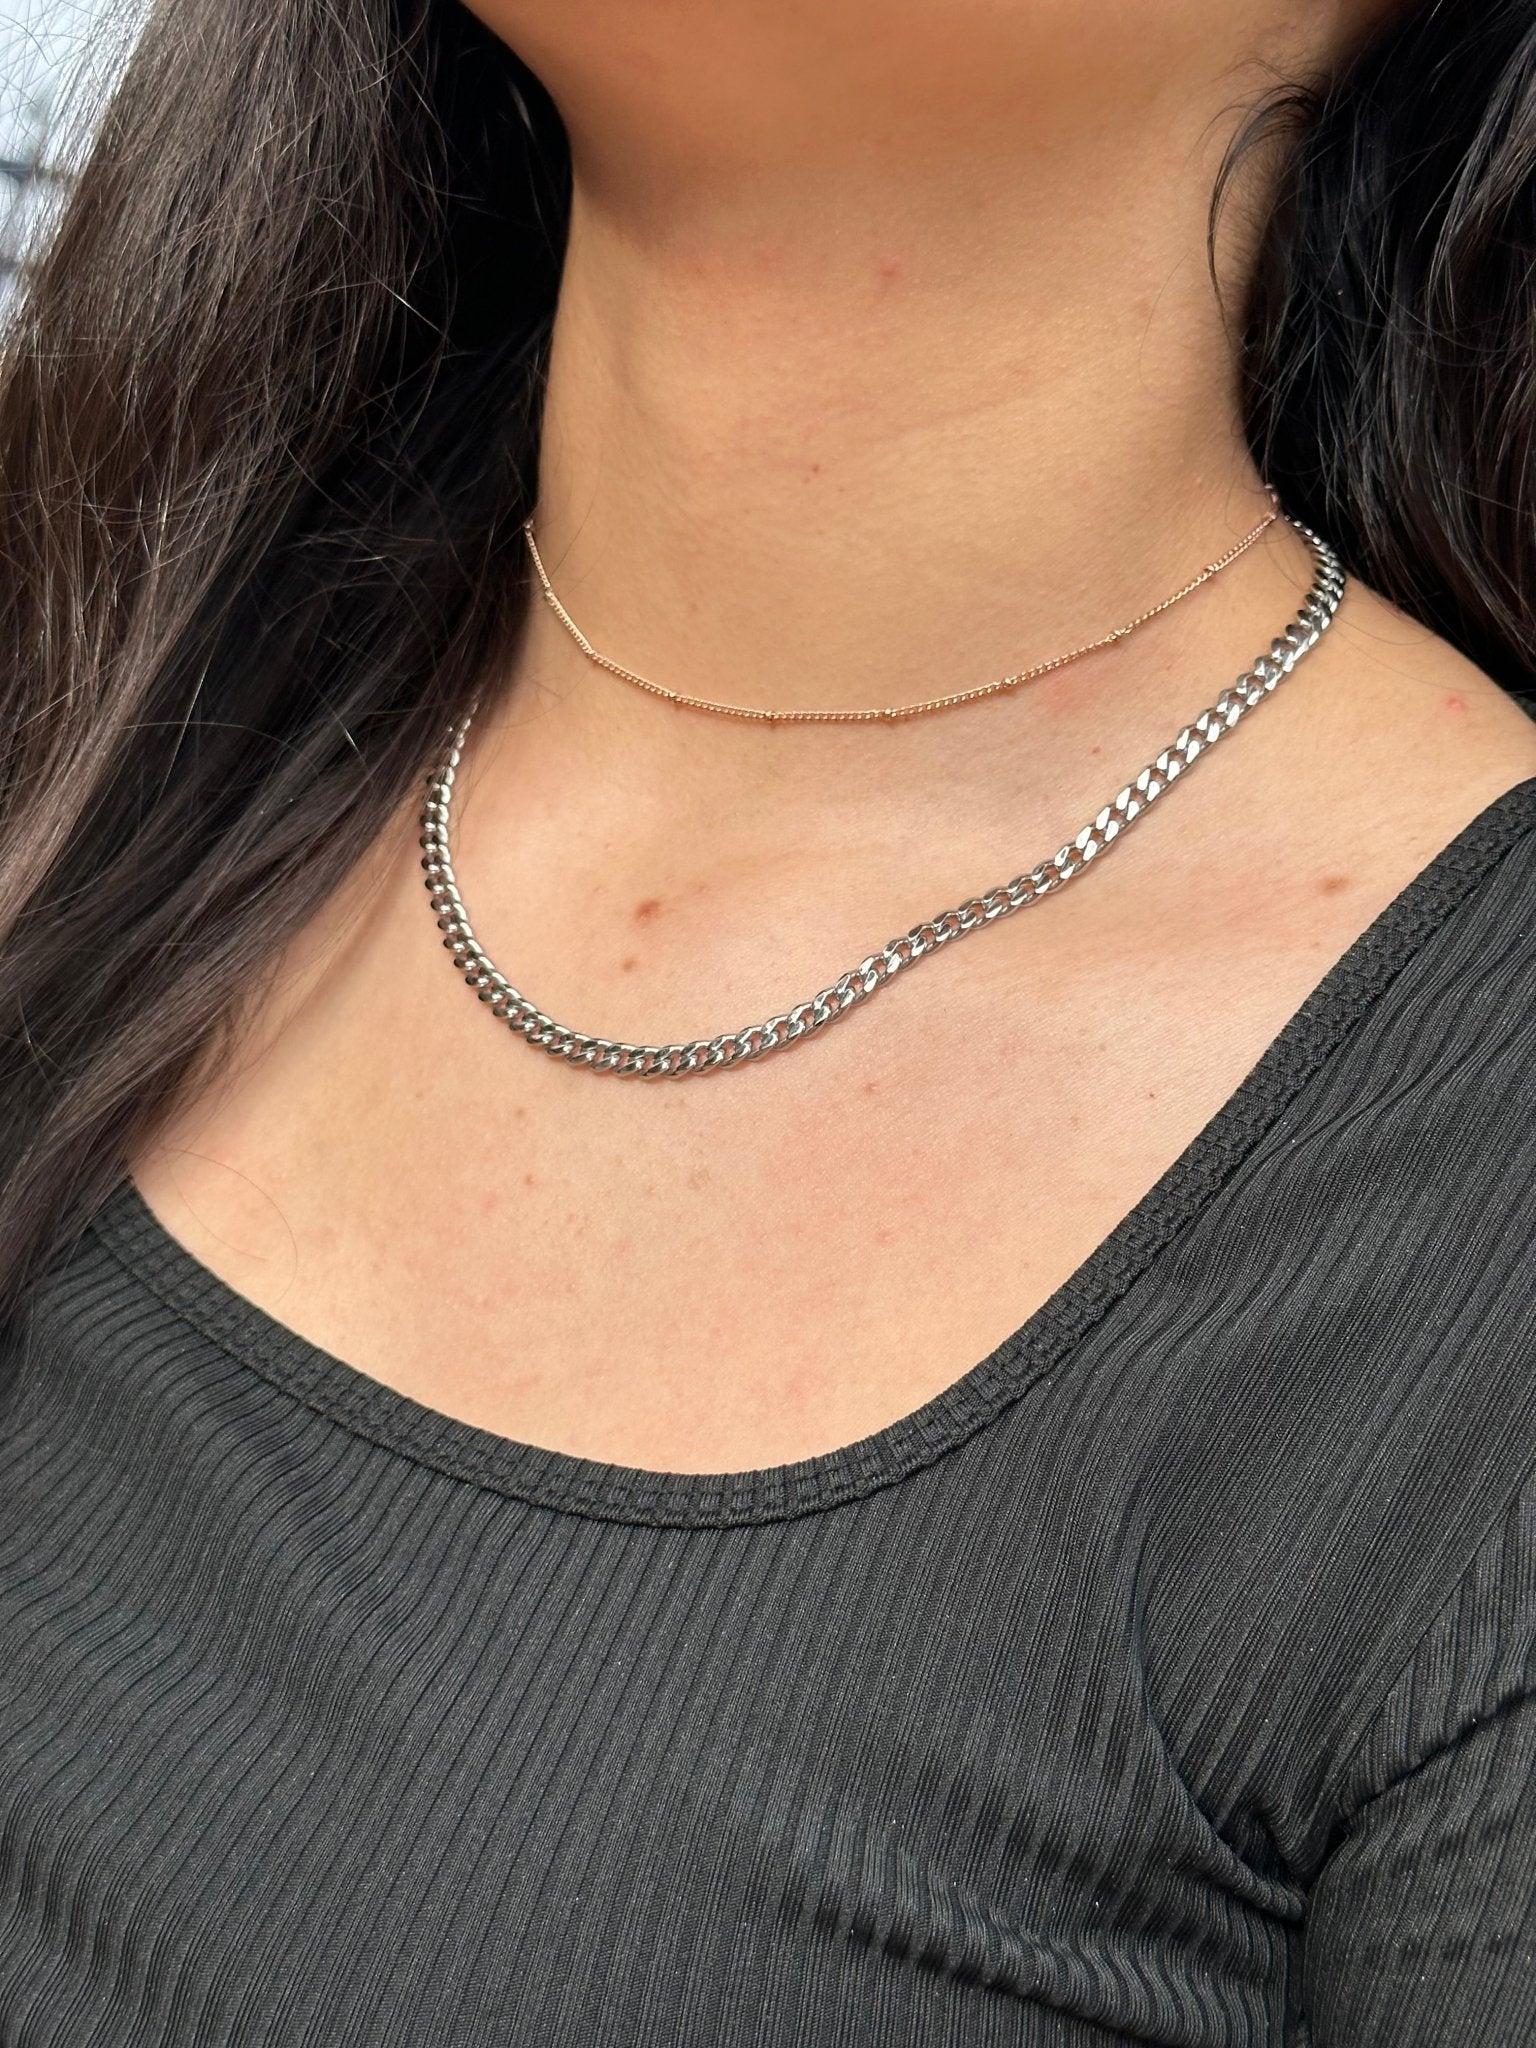 Women's Chain Necklace Silver / Gold